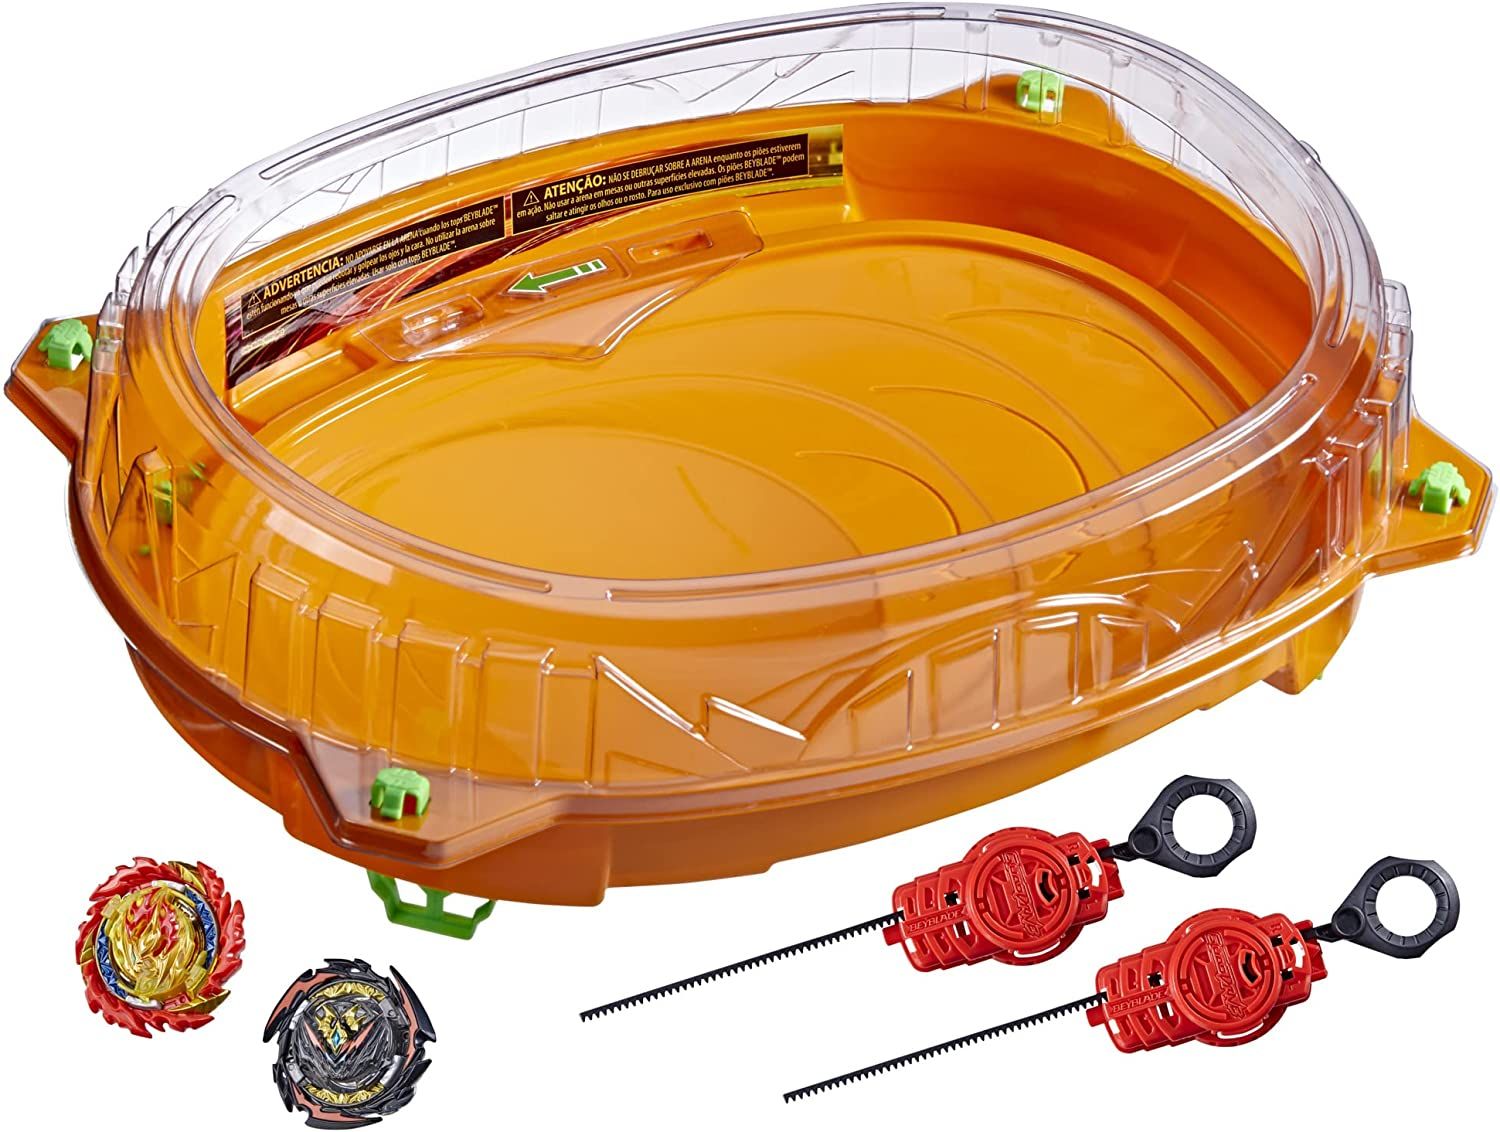 Beyblade Burst QuadDrive is one of the best Beyblade stadiums